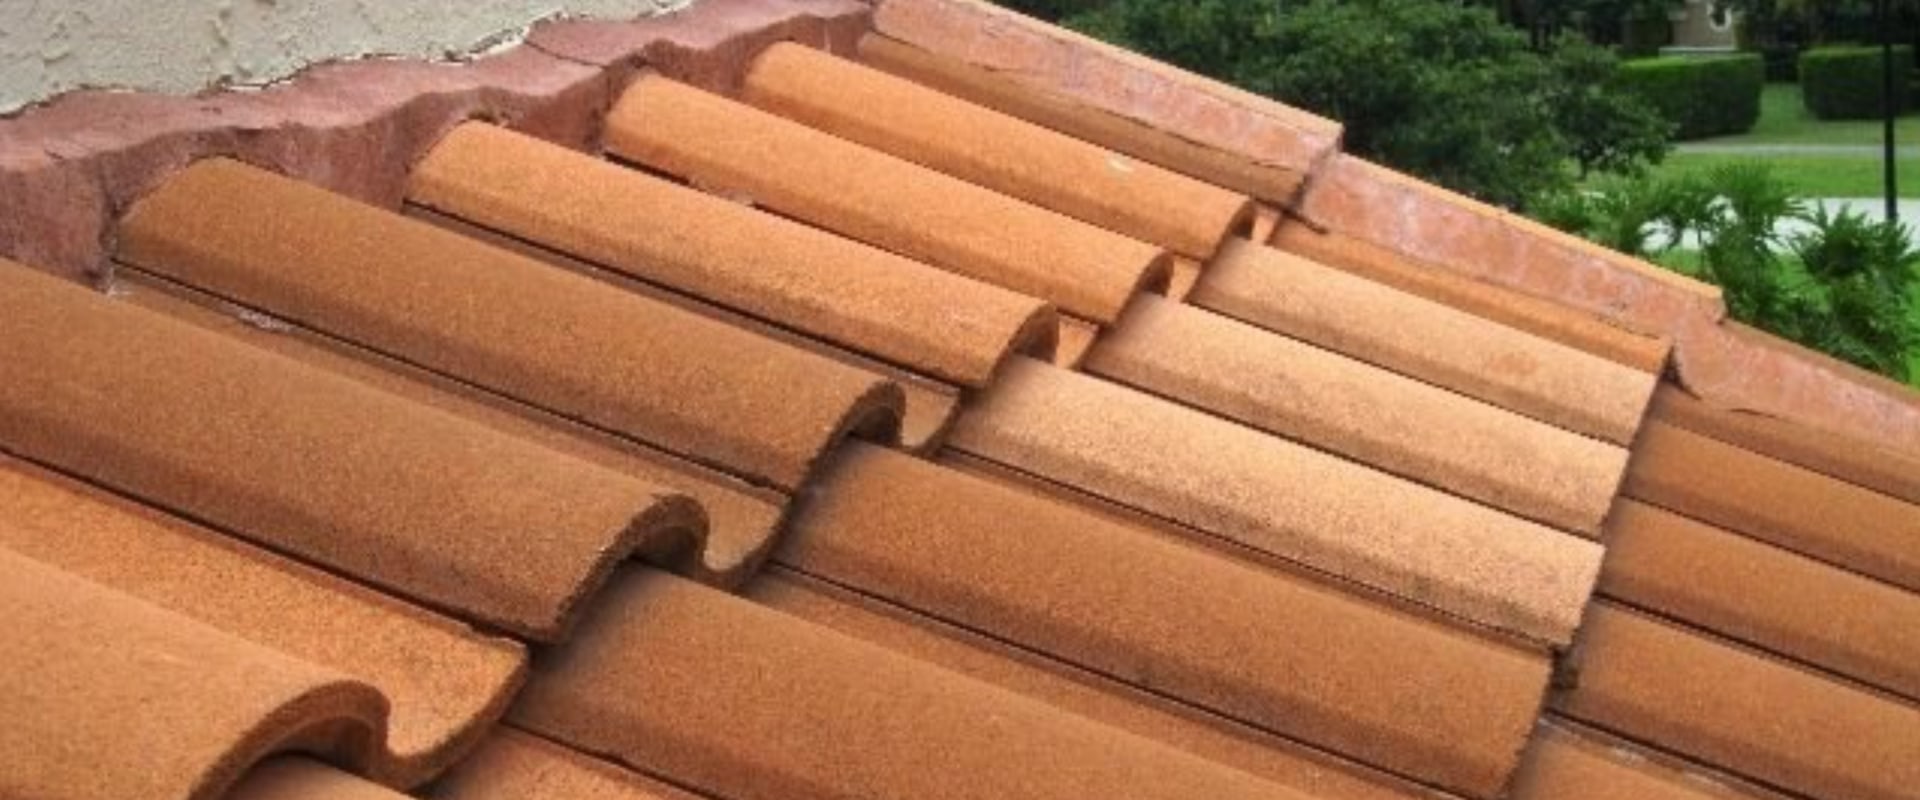 Clay Tile Roofs for Commercial Roofs